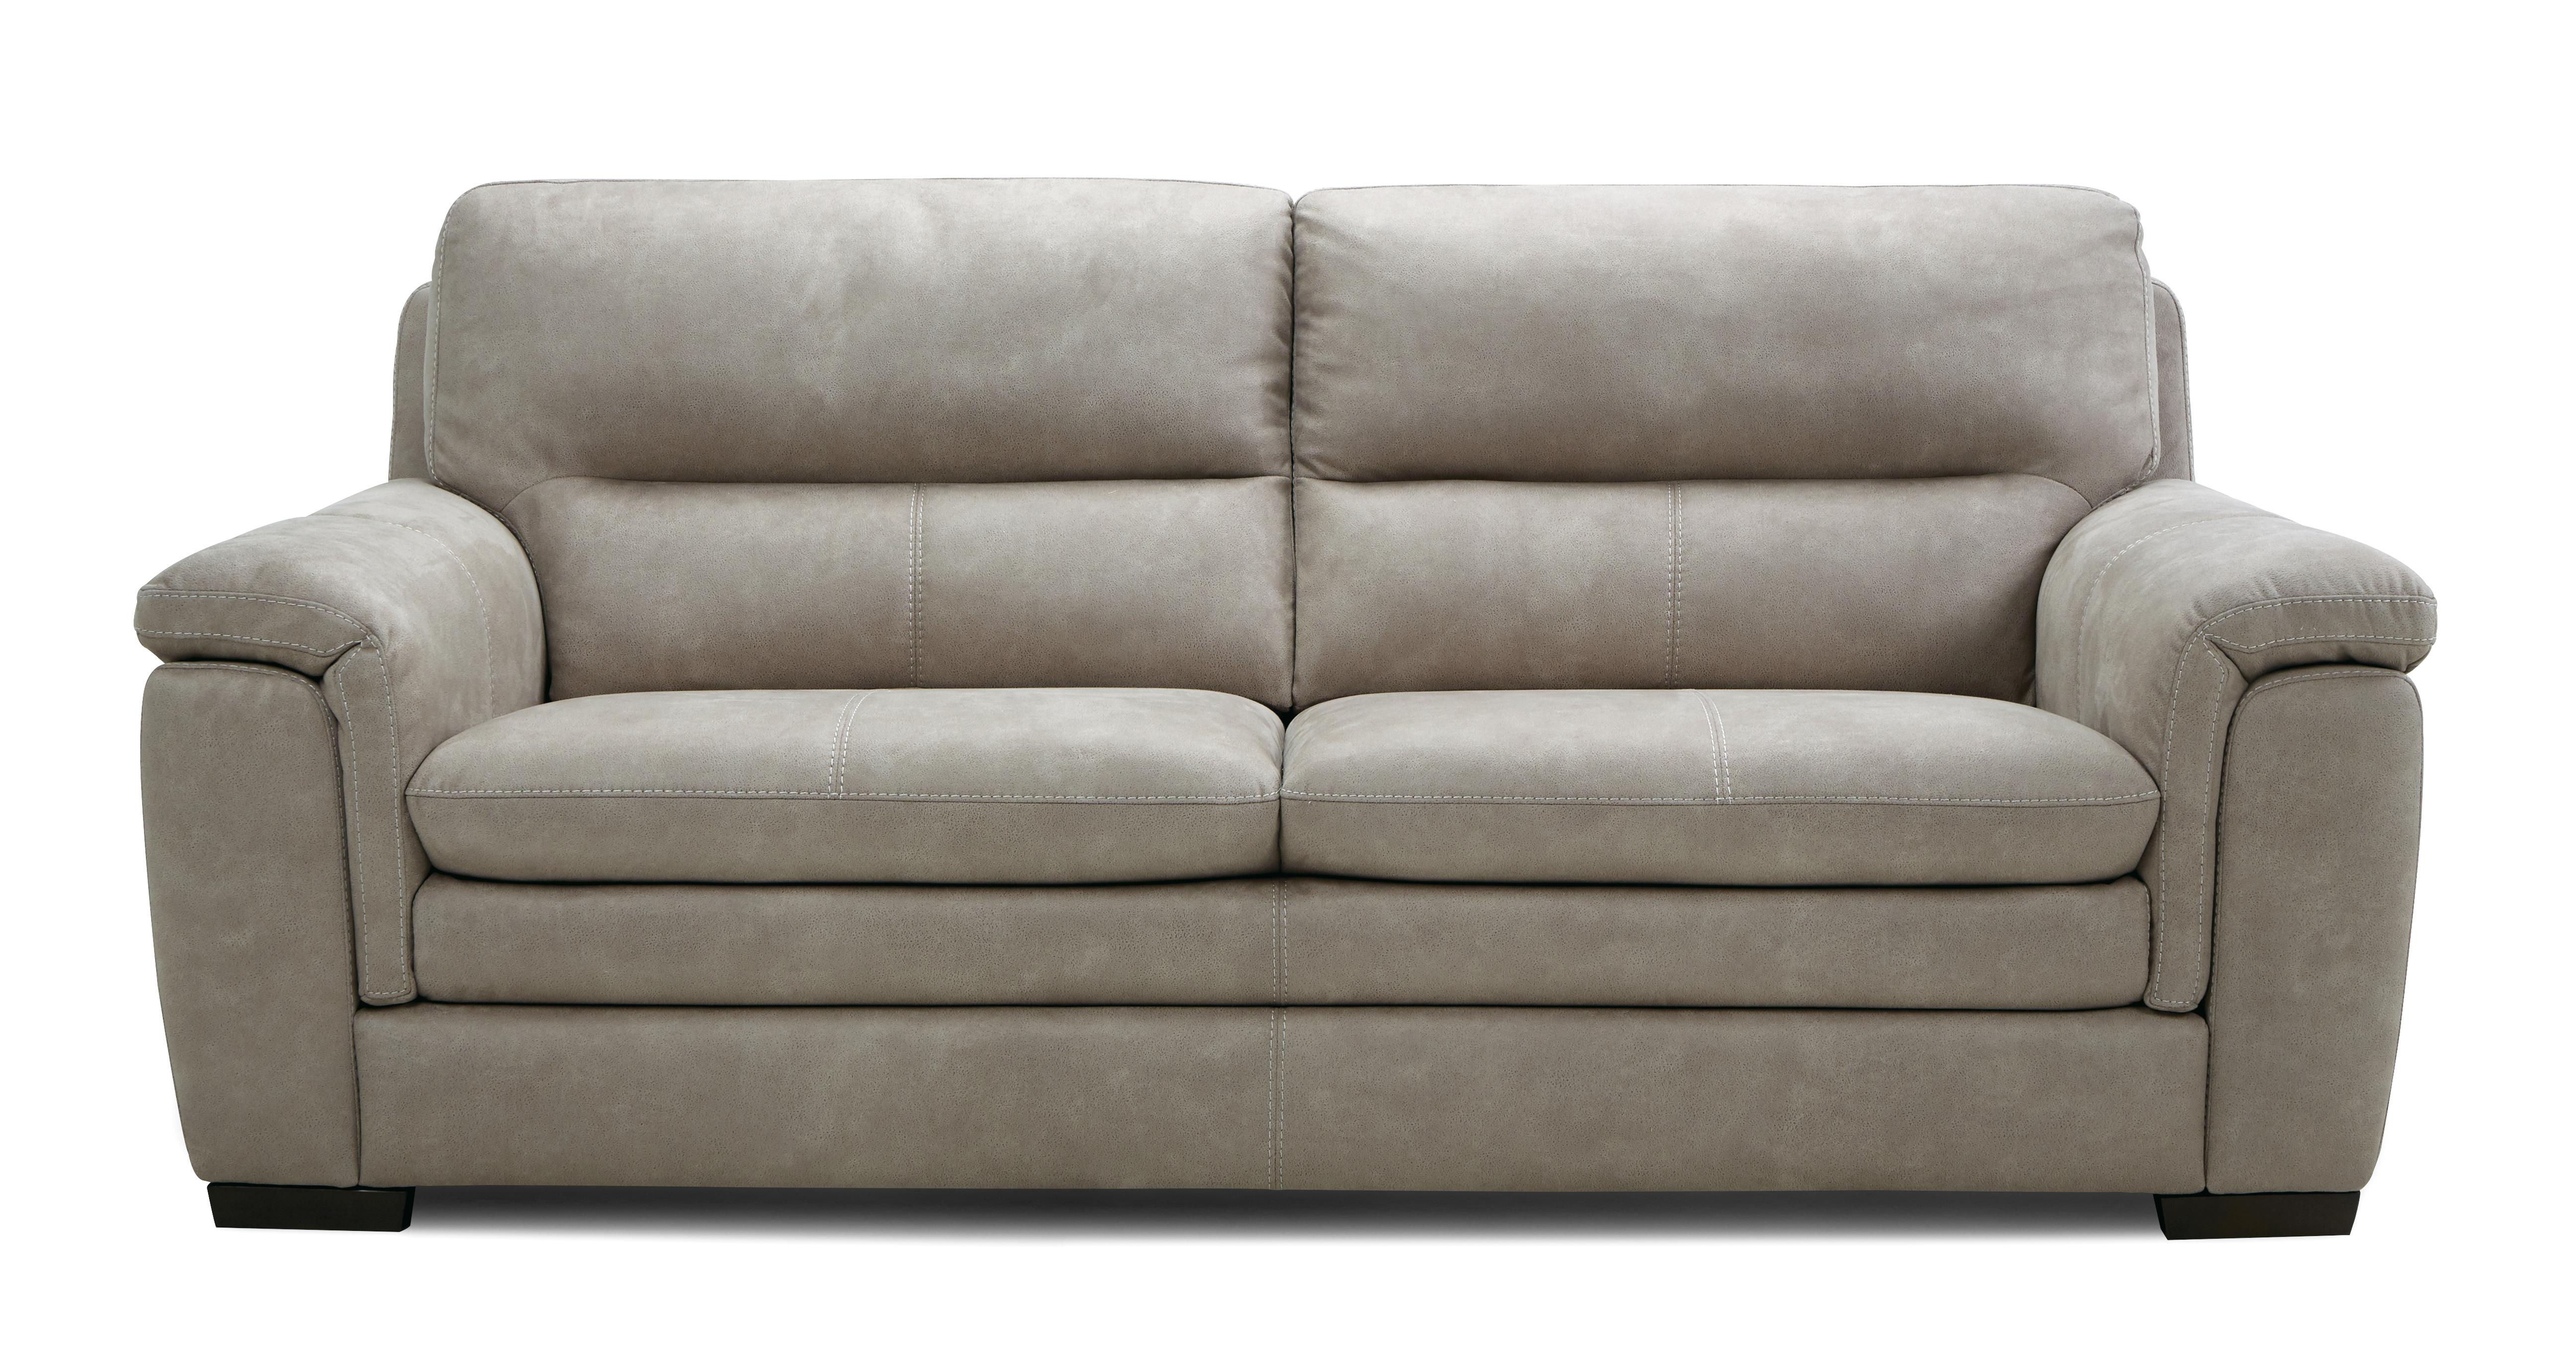 Elm Fabric 3 Seater Sofa Arizona Dfs, How Much Fabric Required For 3 Seater Sofa